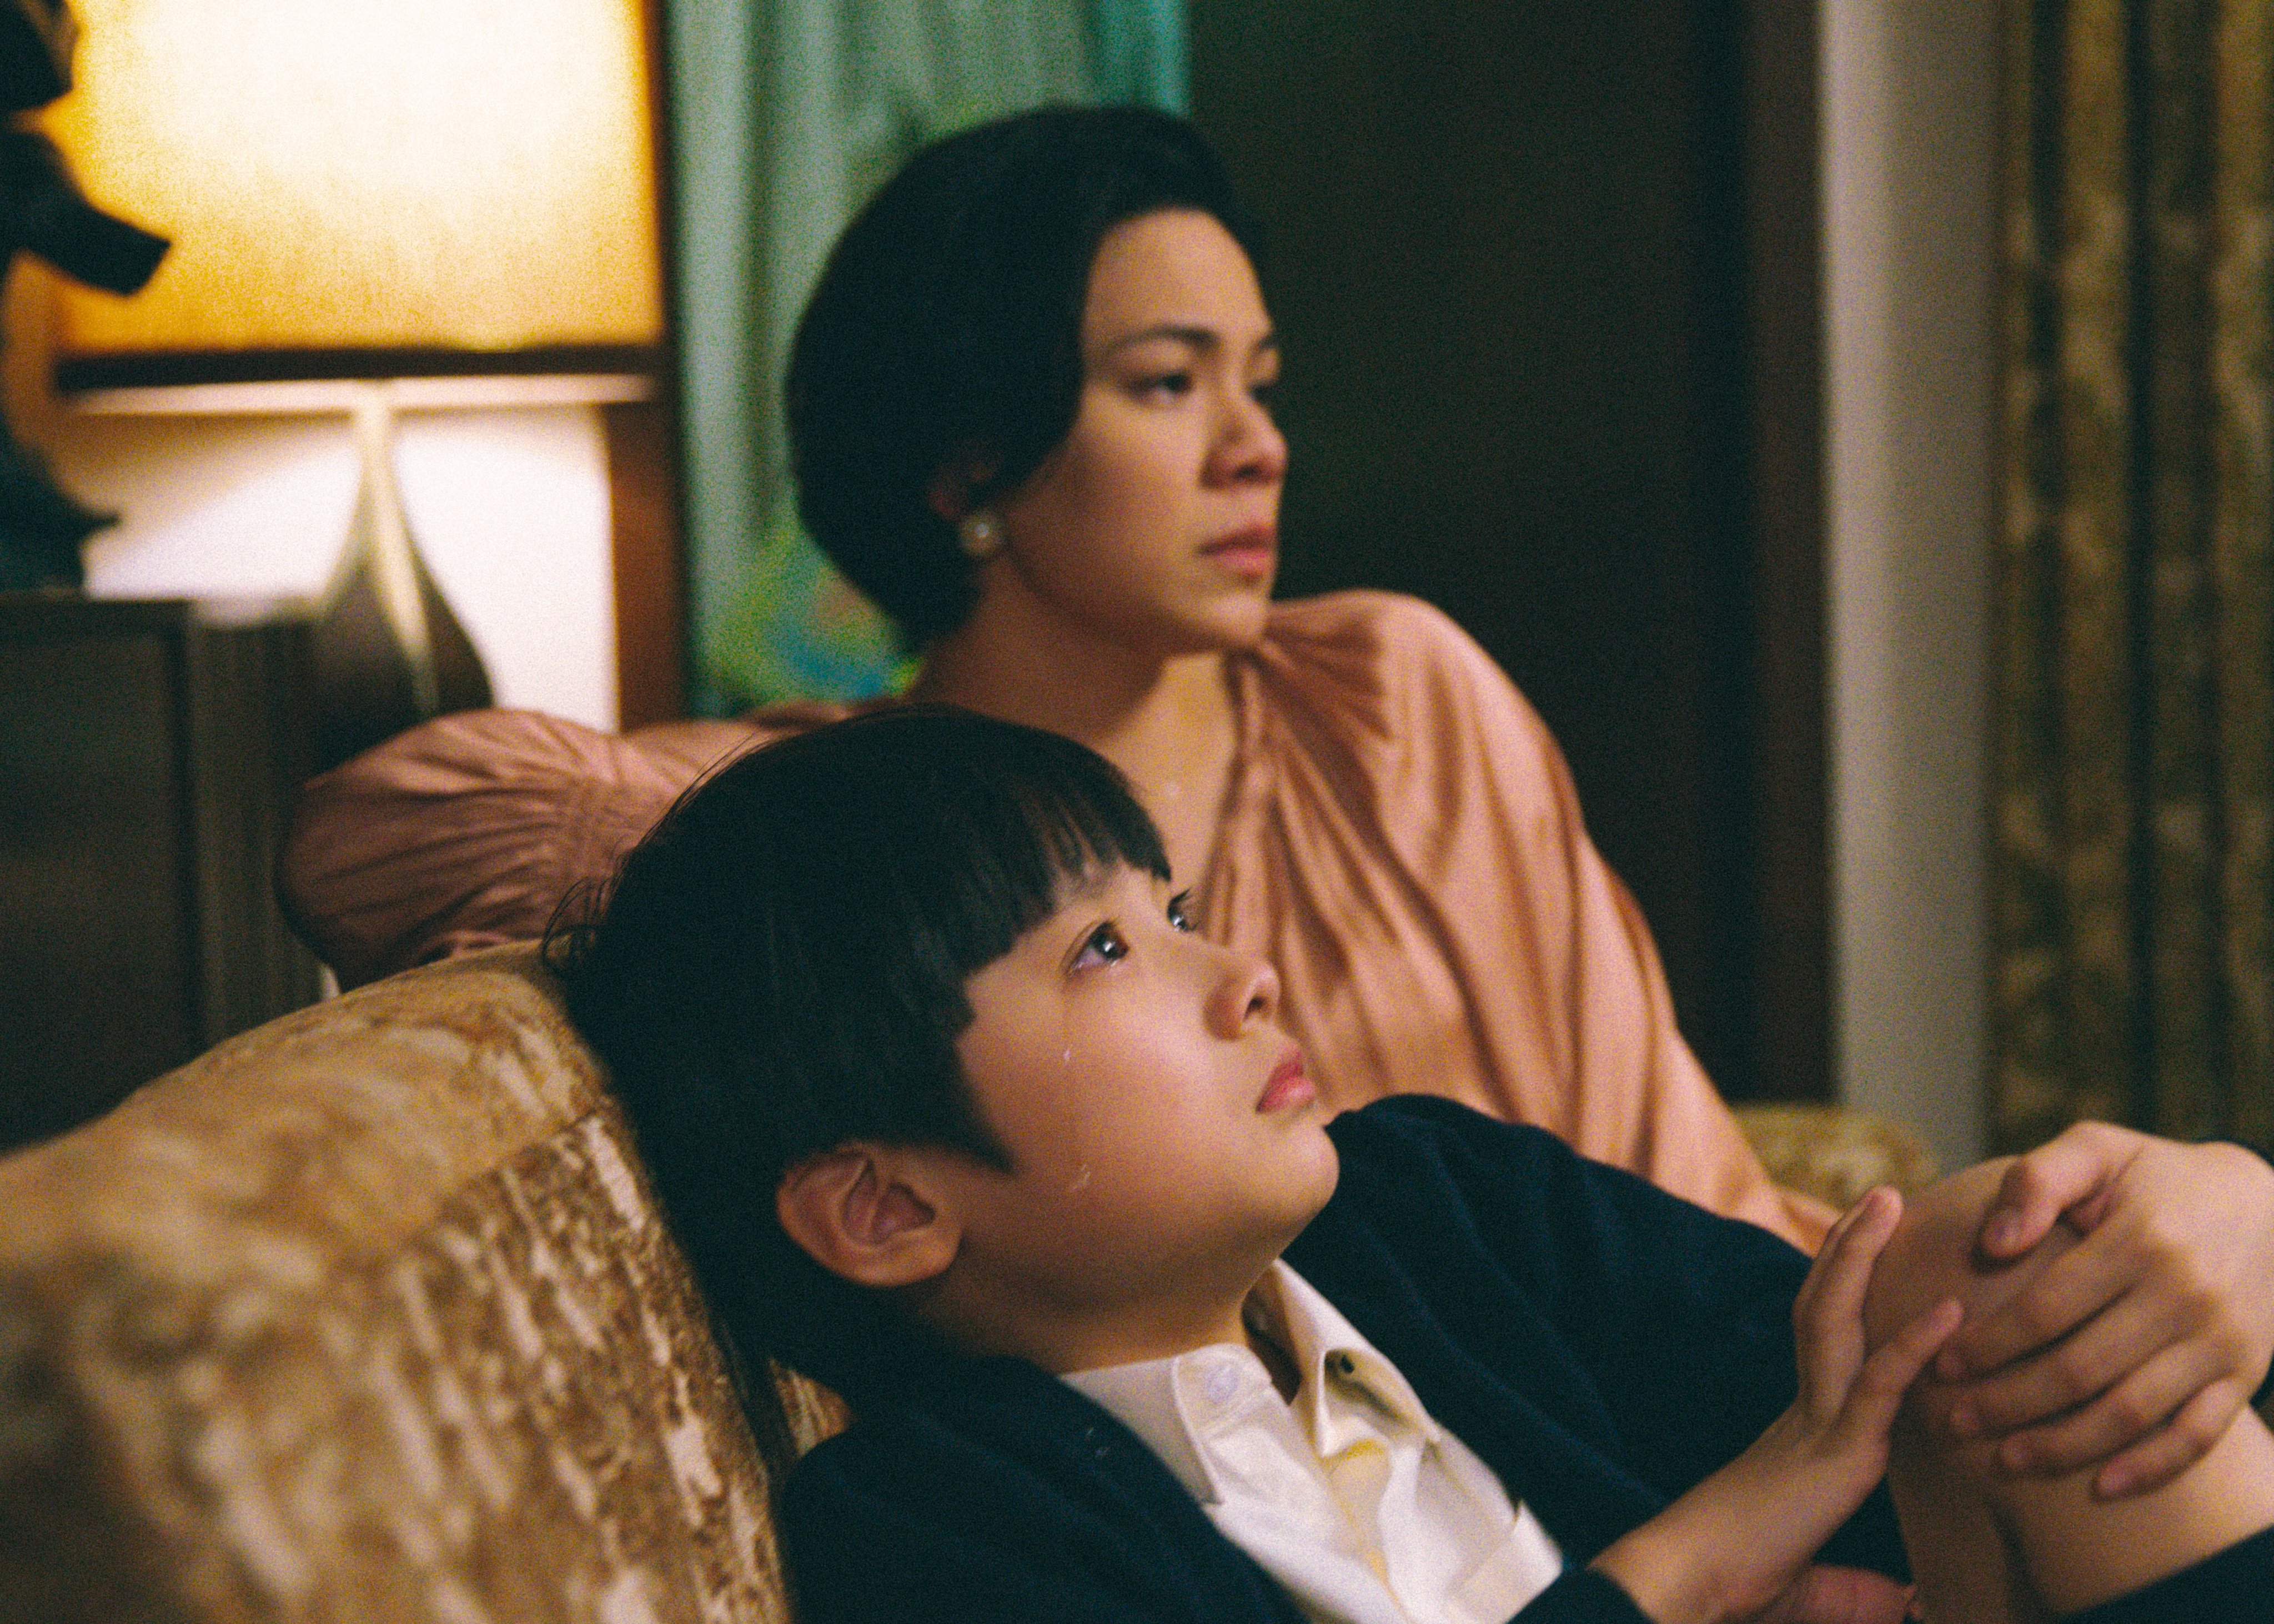 Sean Wong (front) and Rosa Maria Velasco in a still from “Time Still Turns the Pages”.